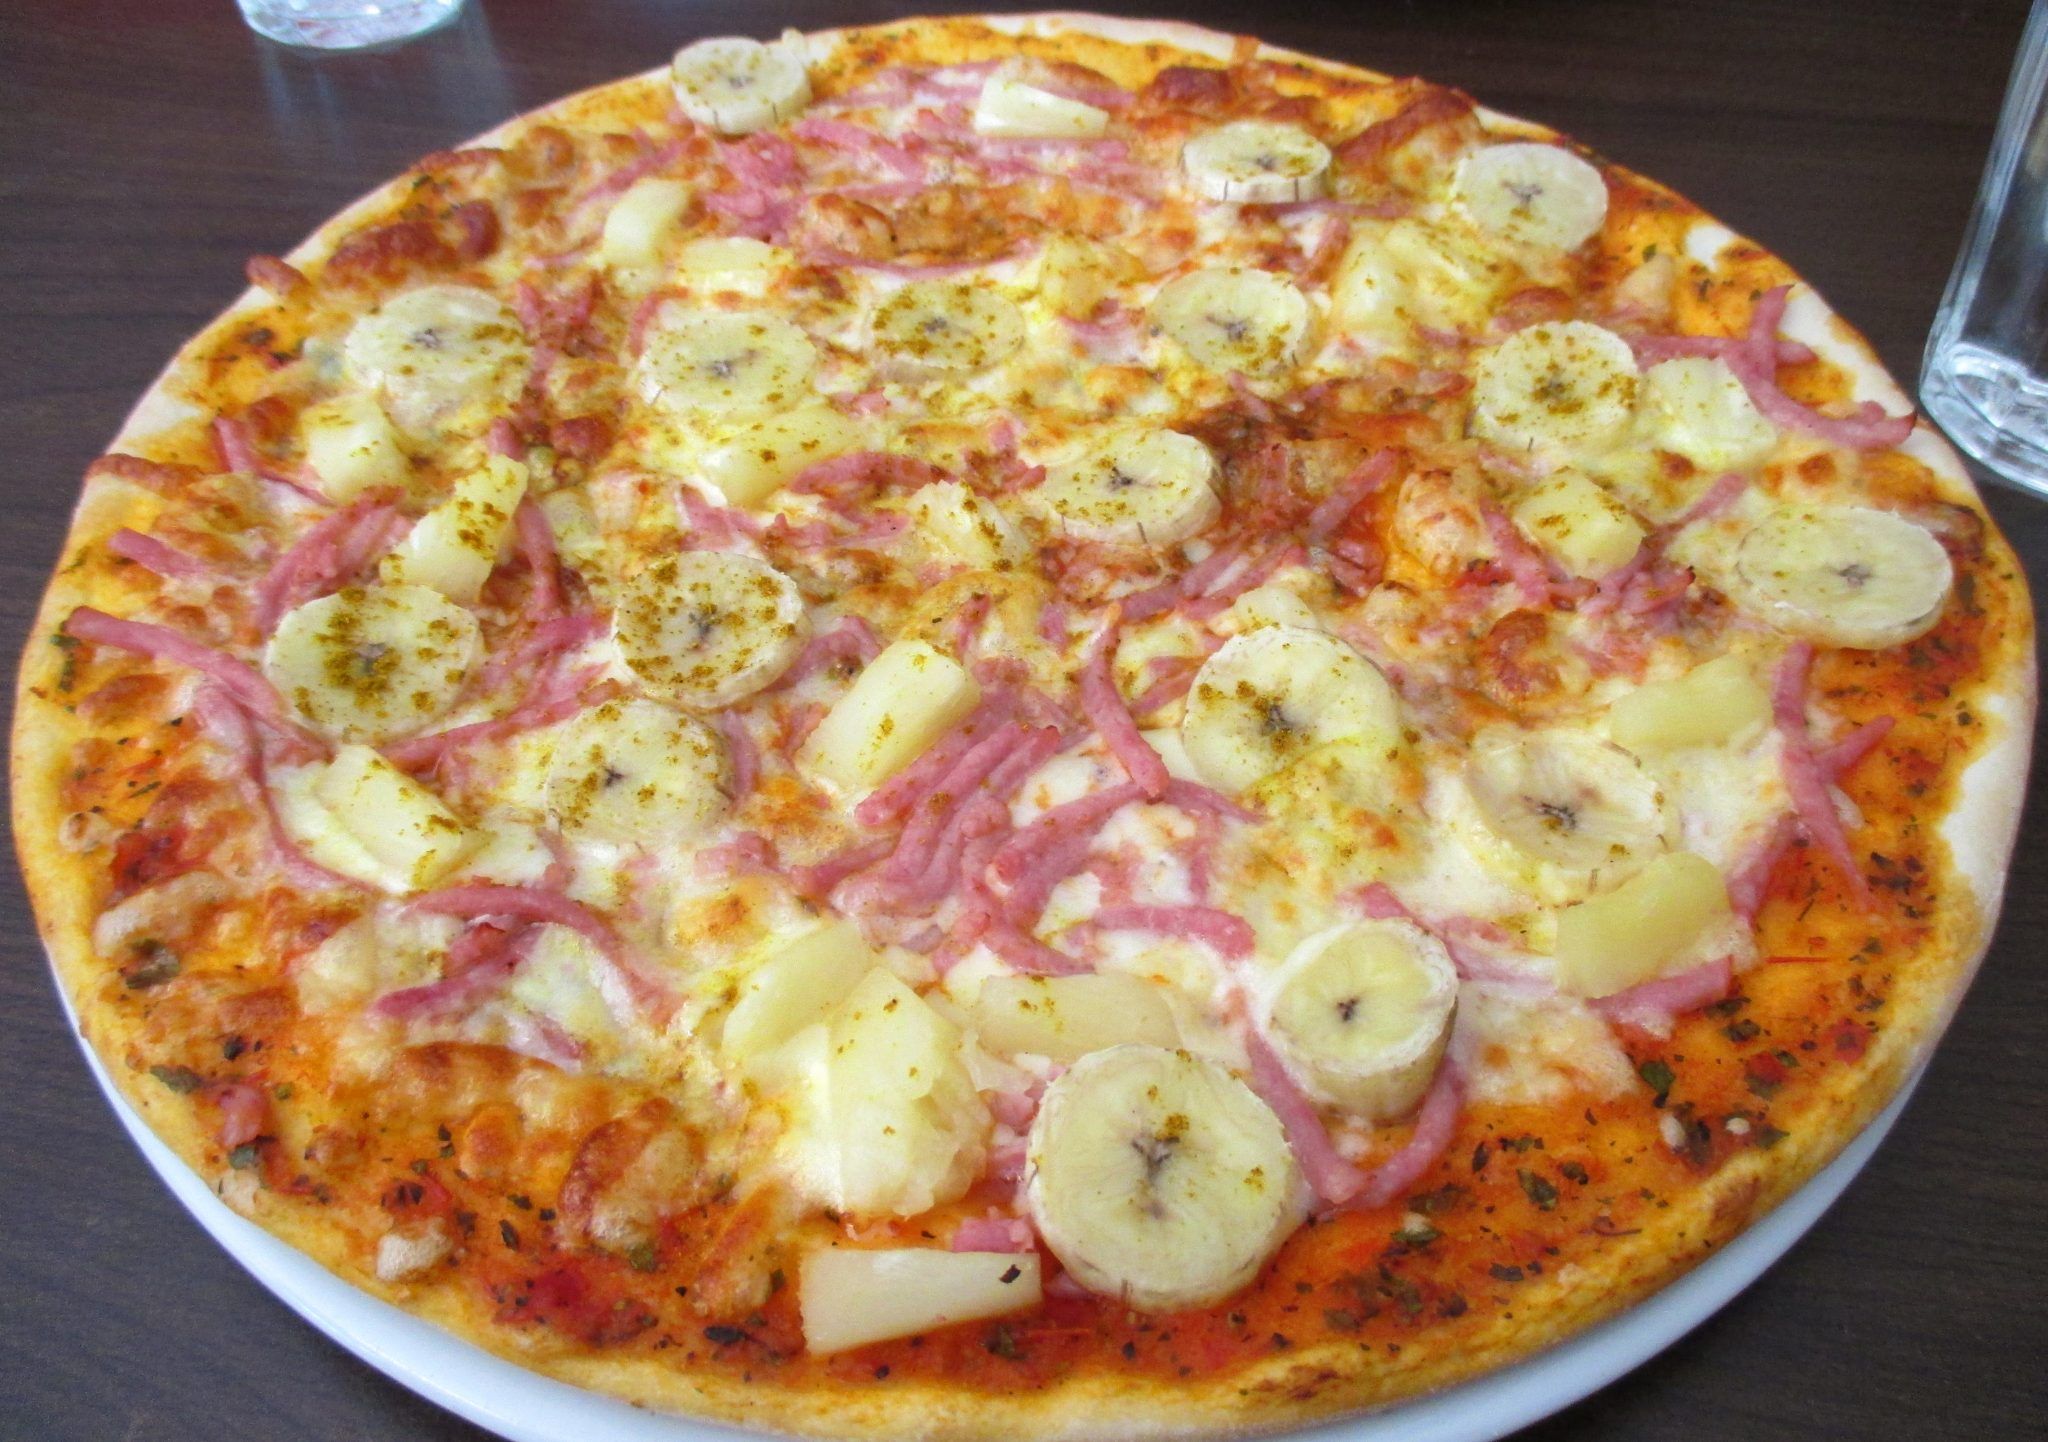 Banana pizza is a thing in countries like Sweden and South Africa